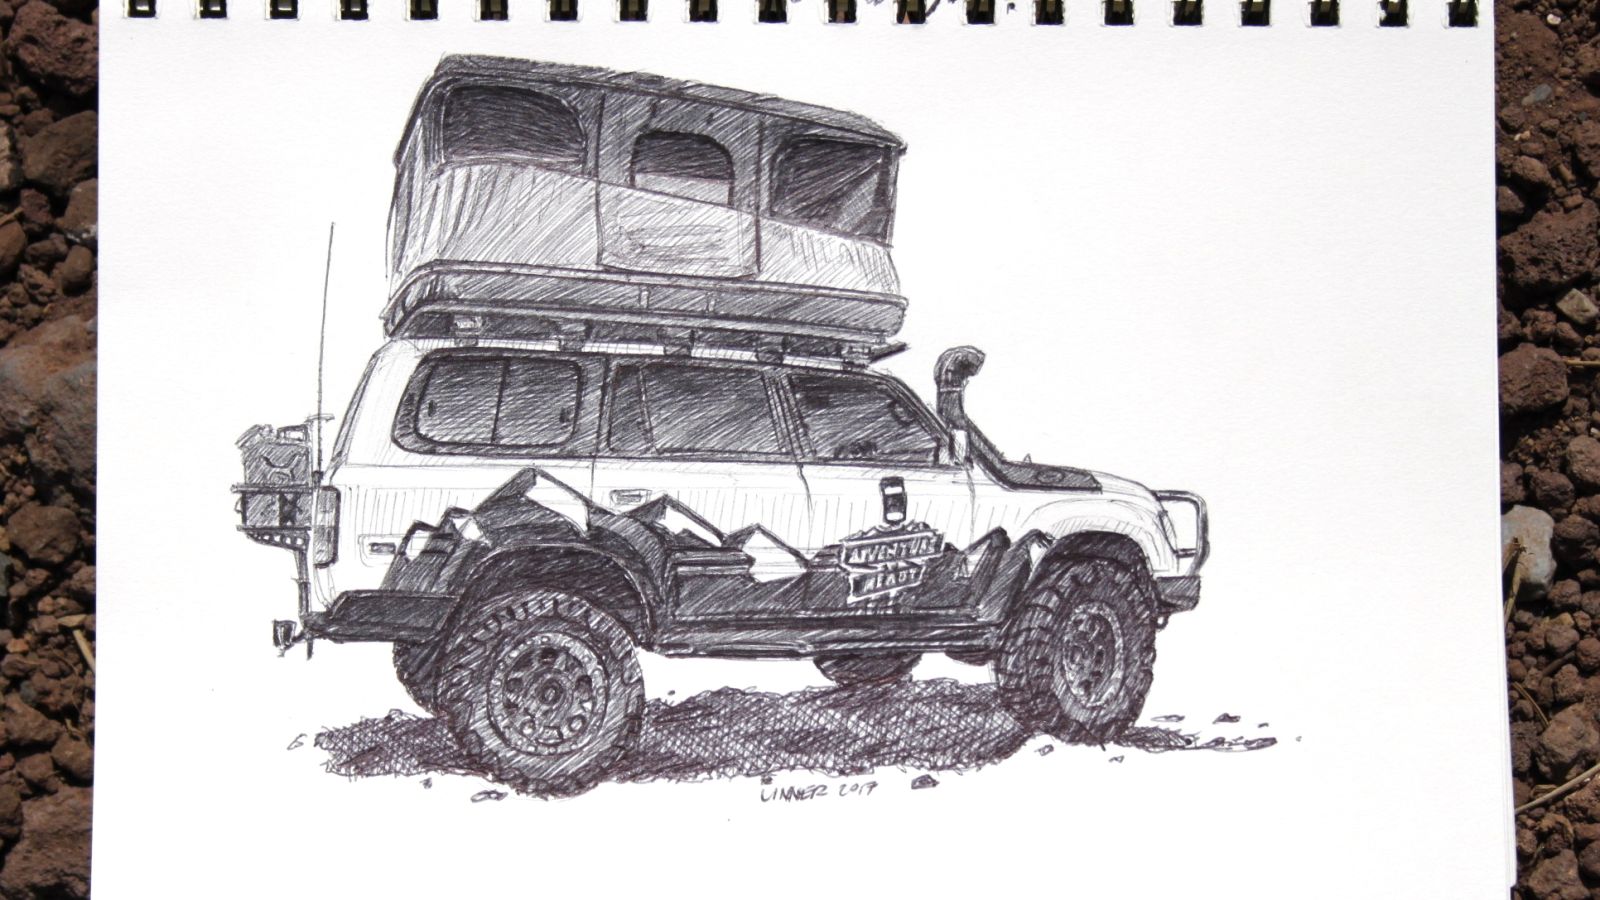 Illustration for article titled Best of Overland and Expedition - May 2017